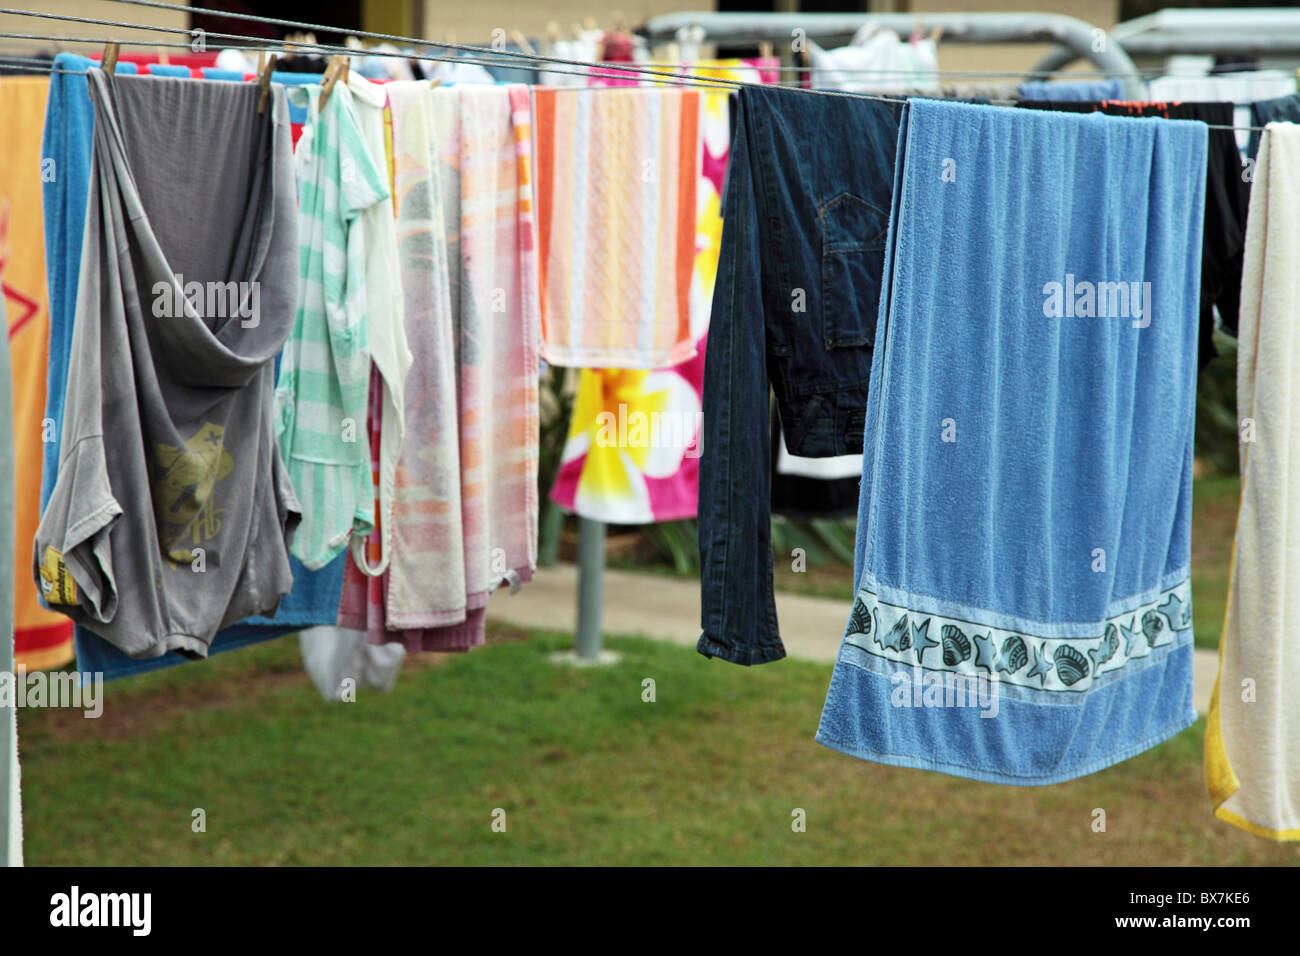 Clothes drying on a clothesline. Stock Photo